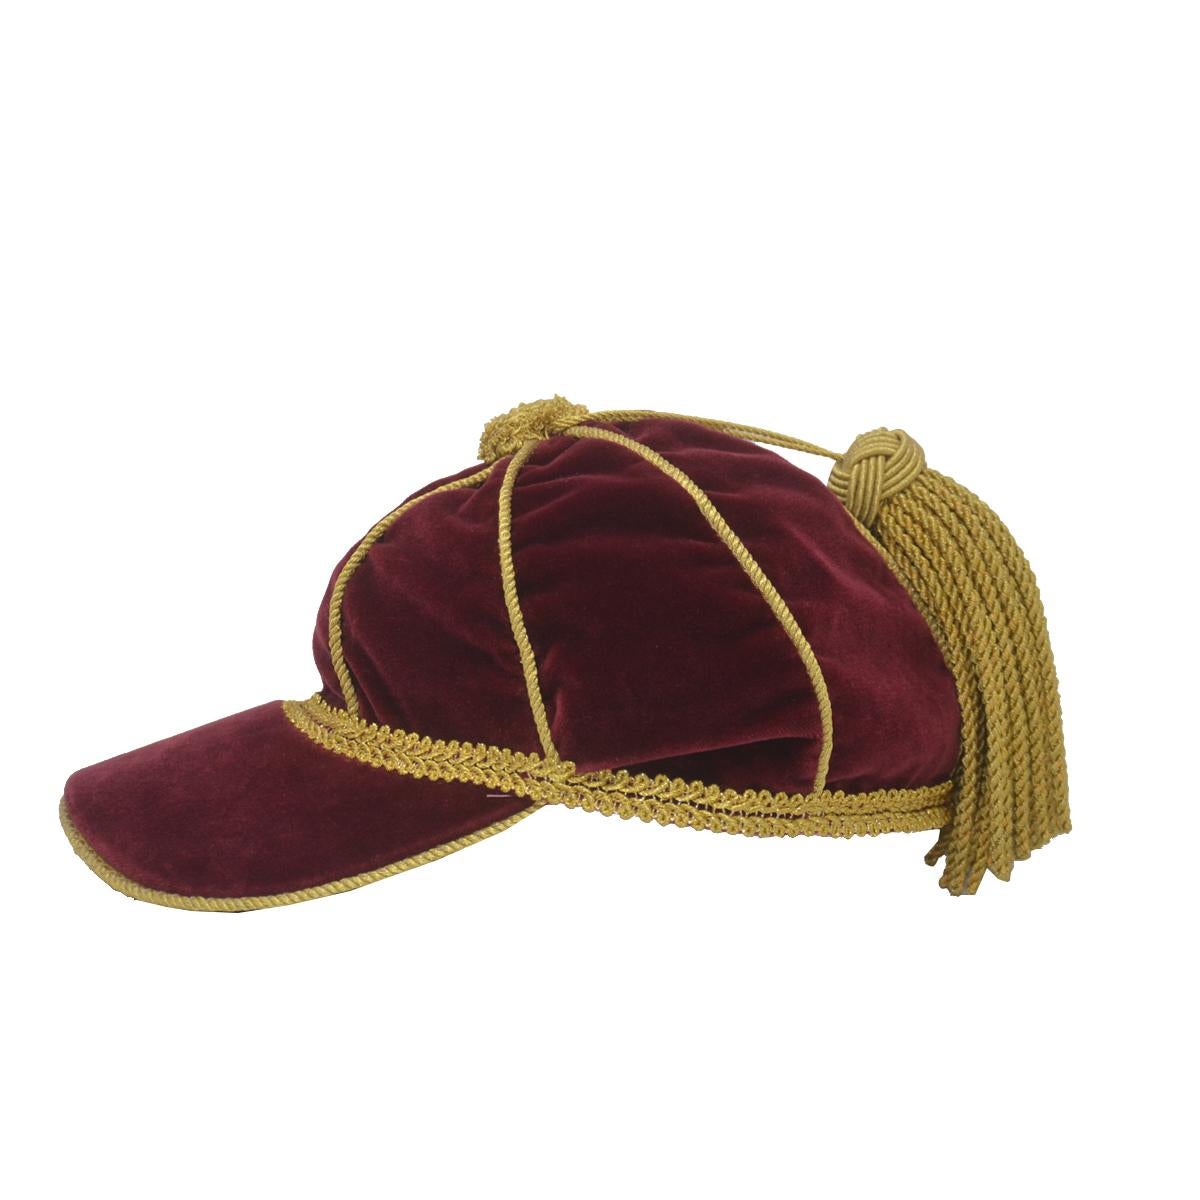 hat with a tassel